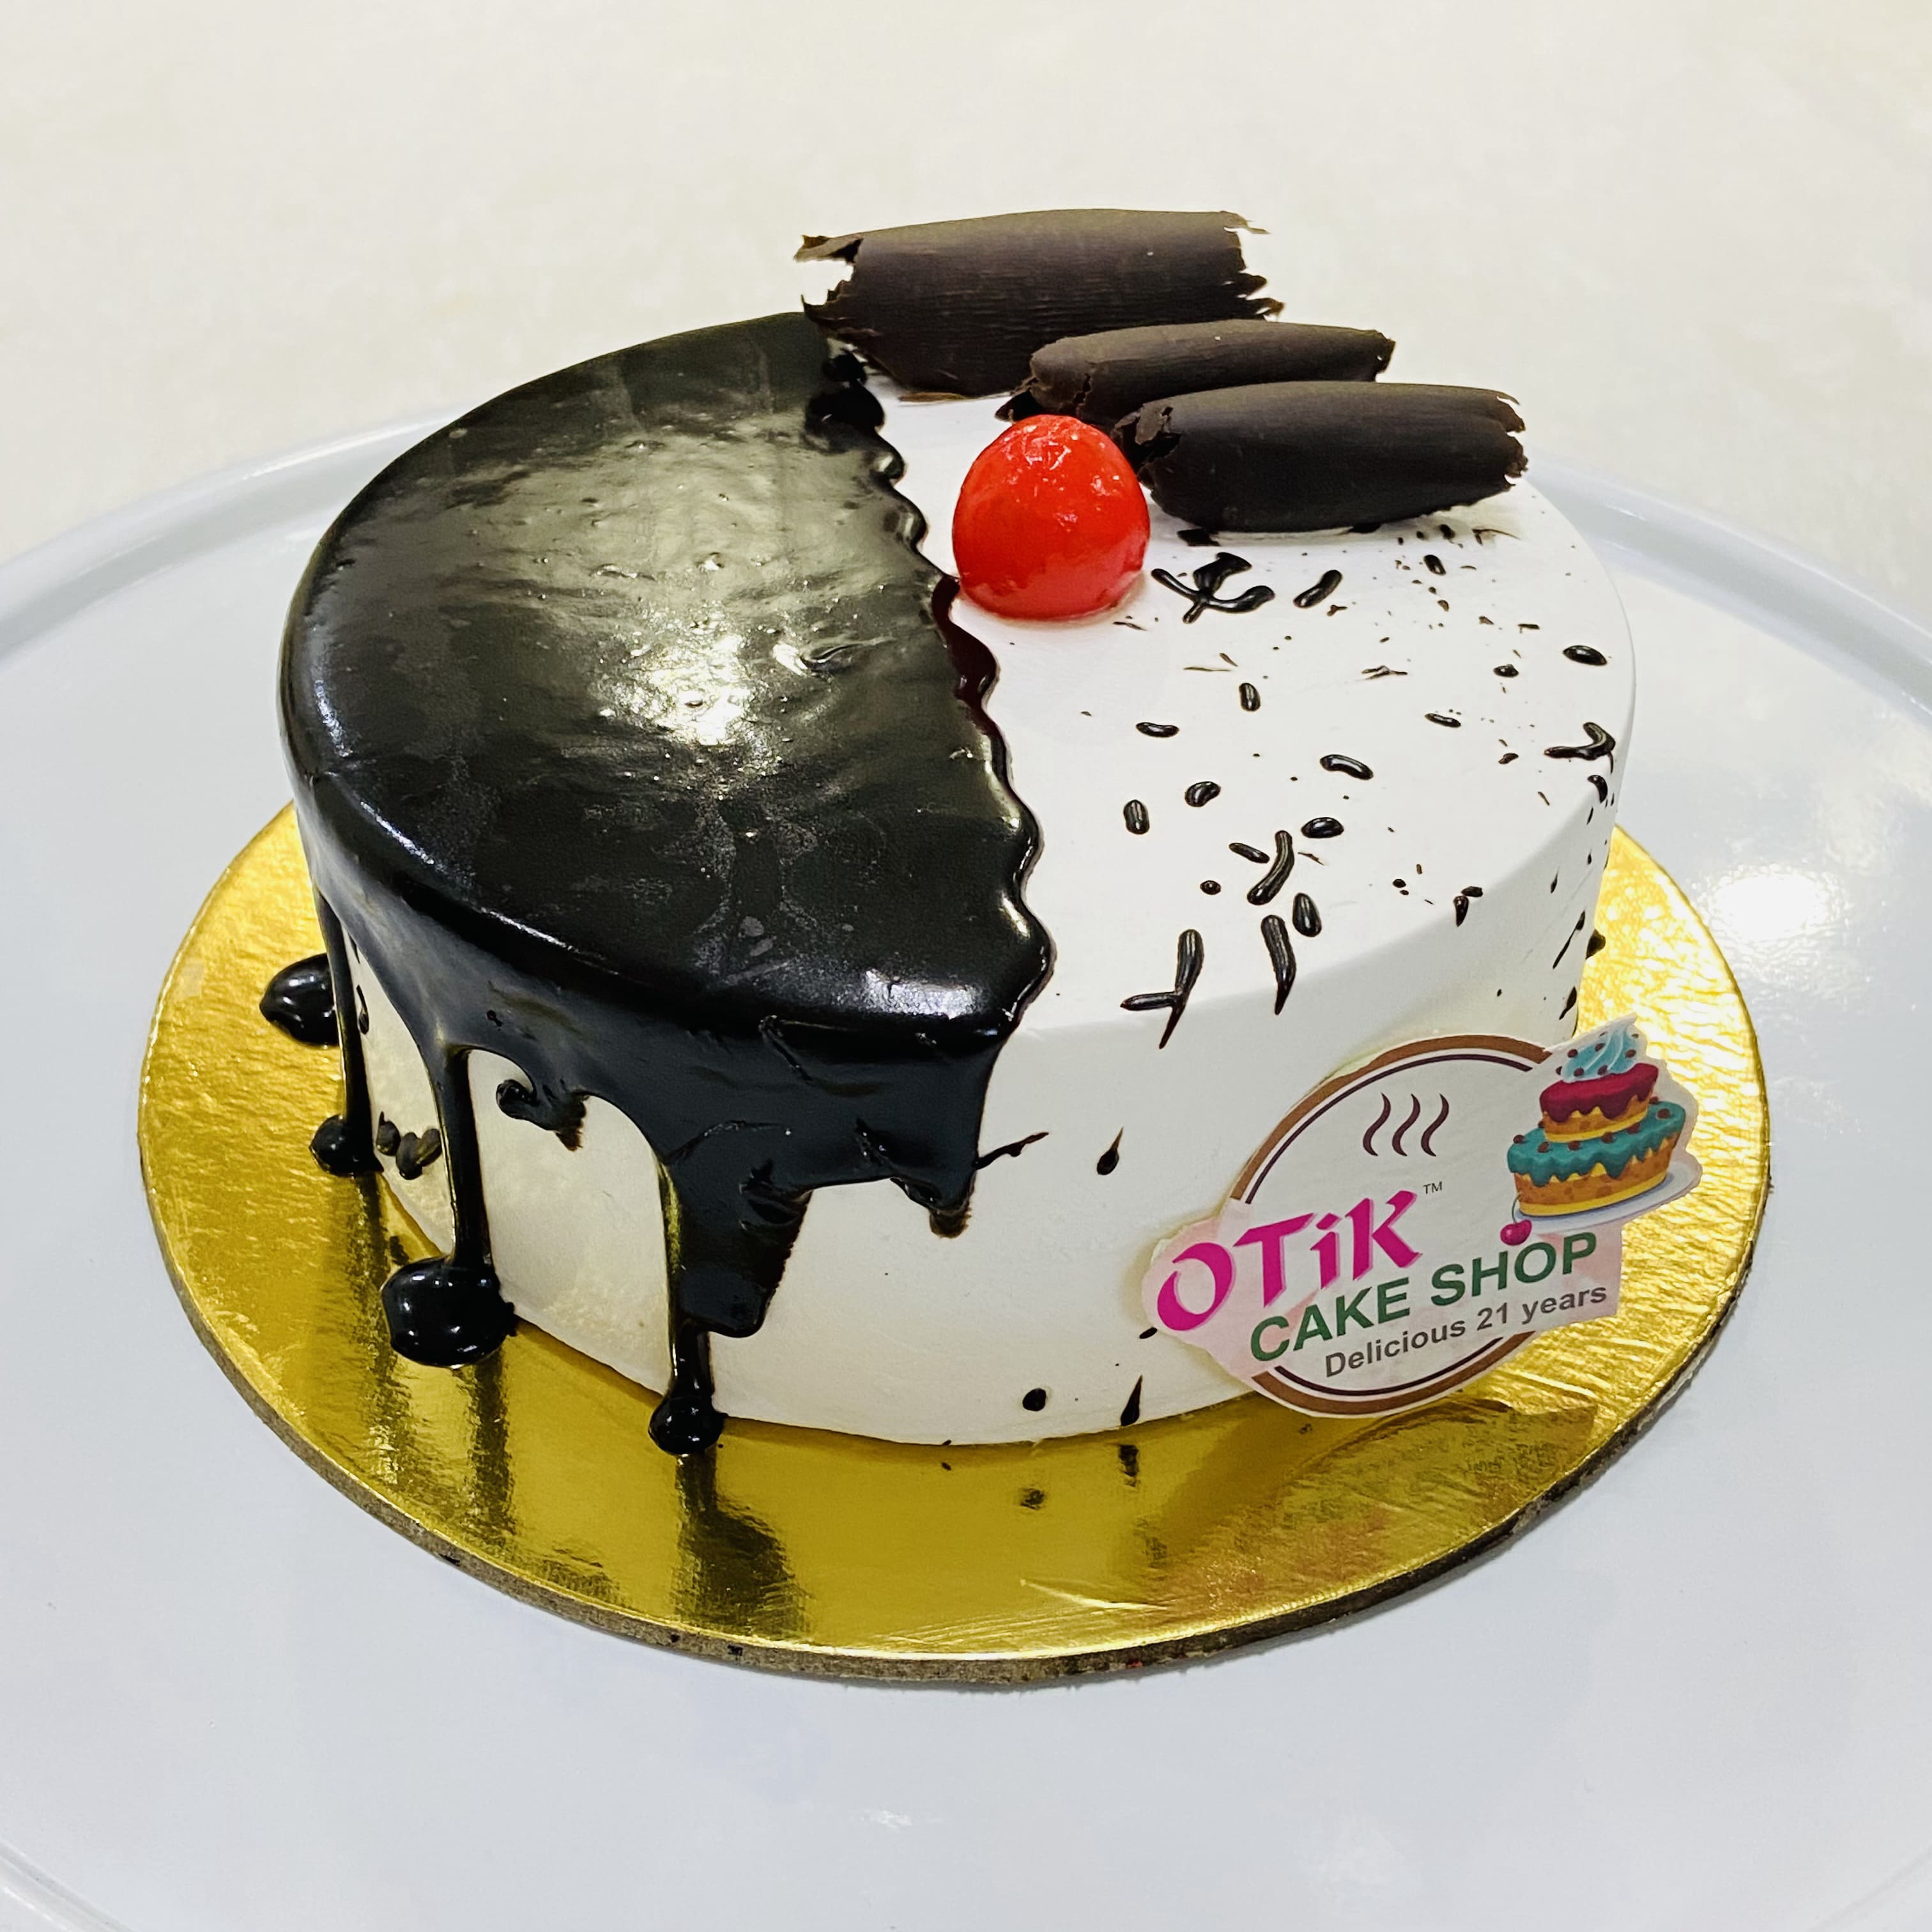 Pin on Fast Food | Cakes | Restaurant